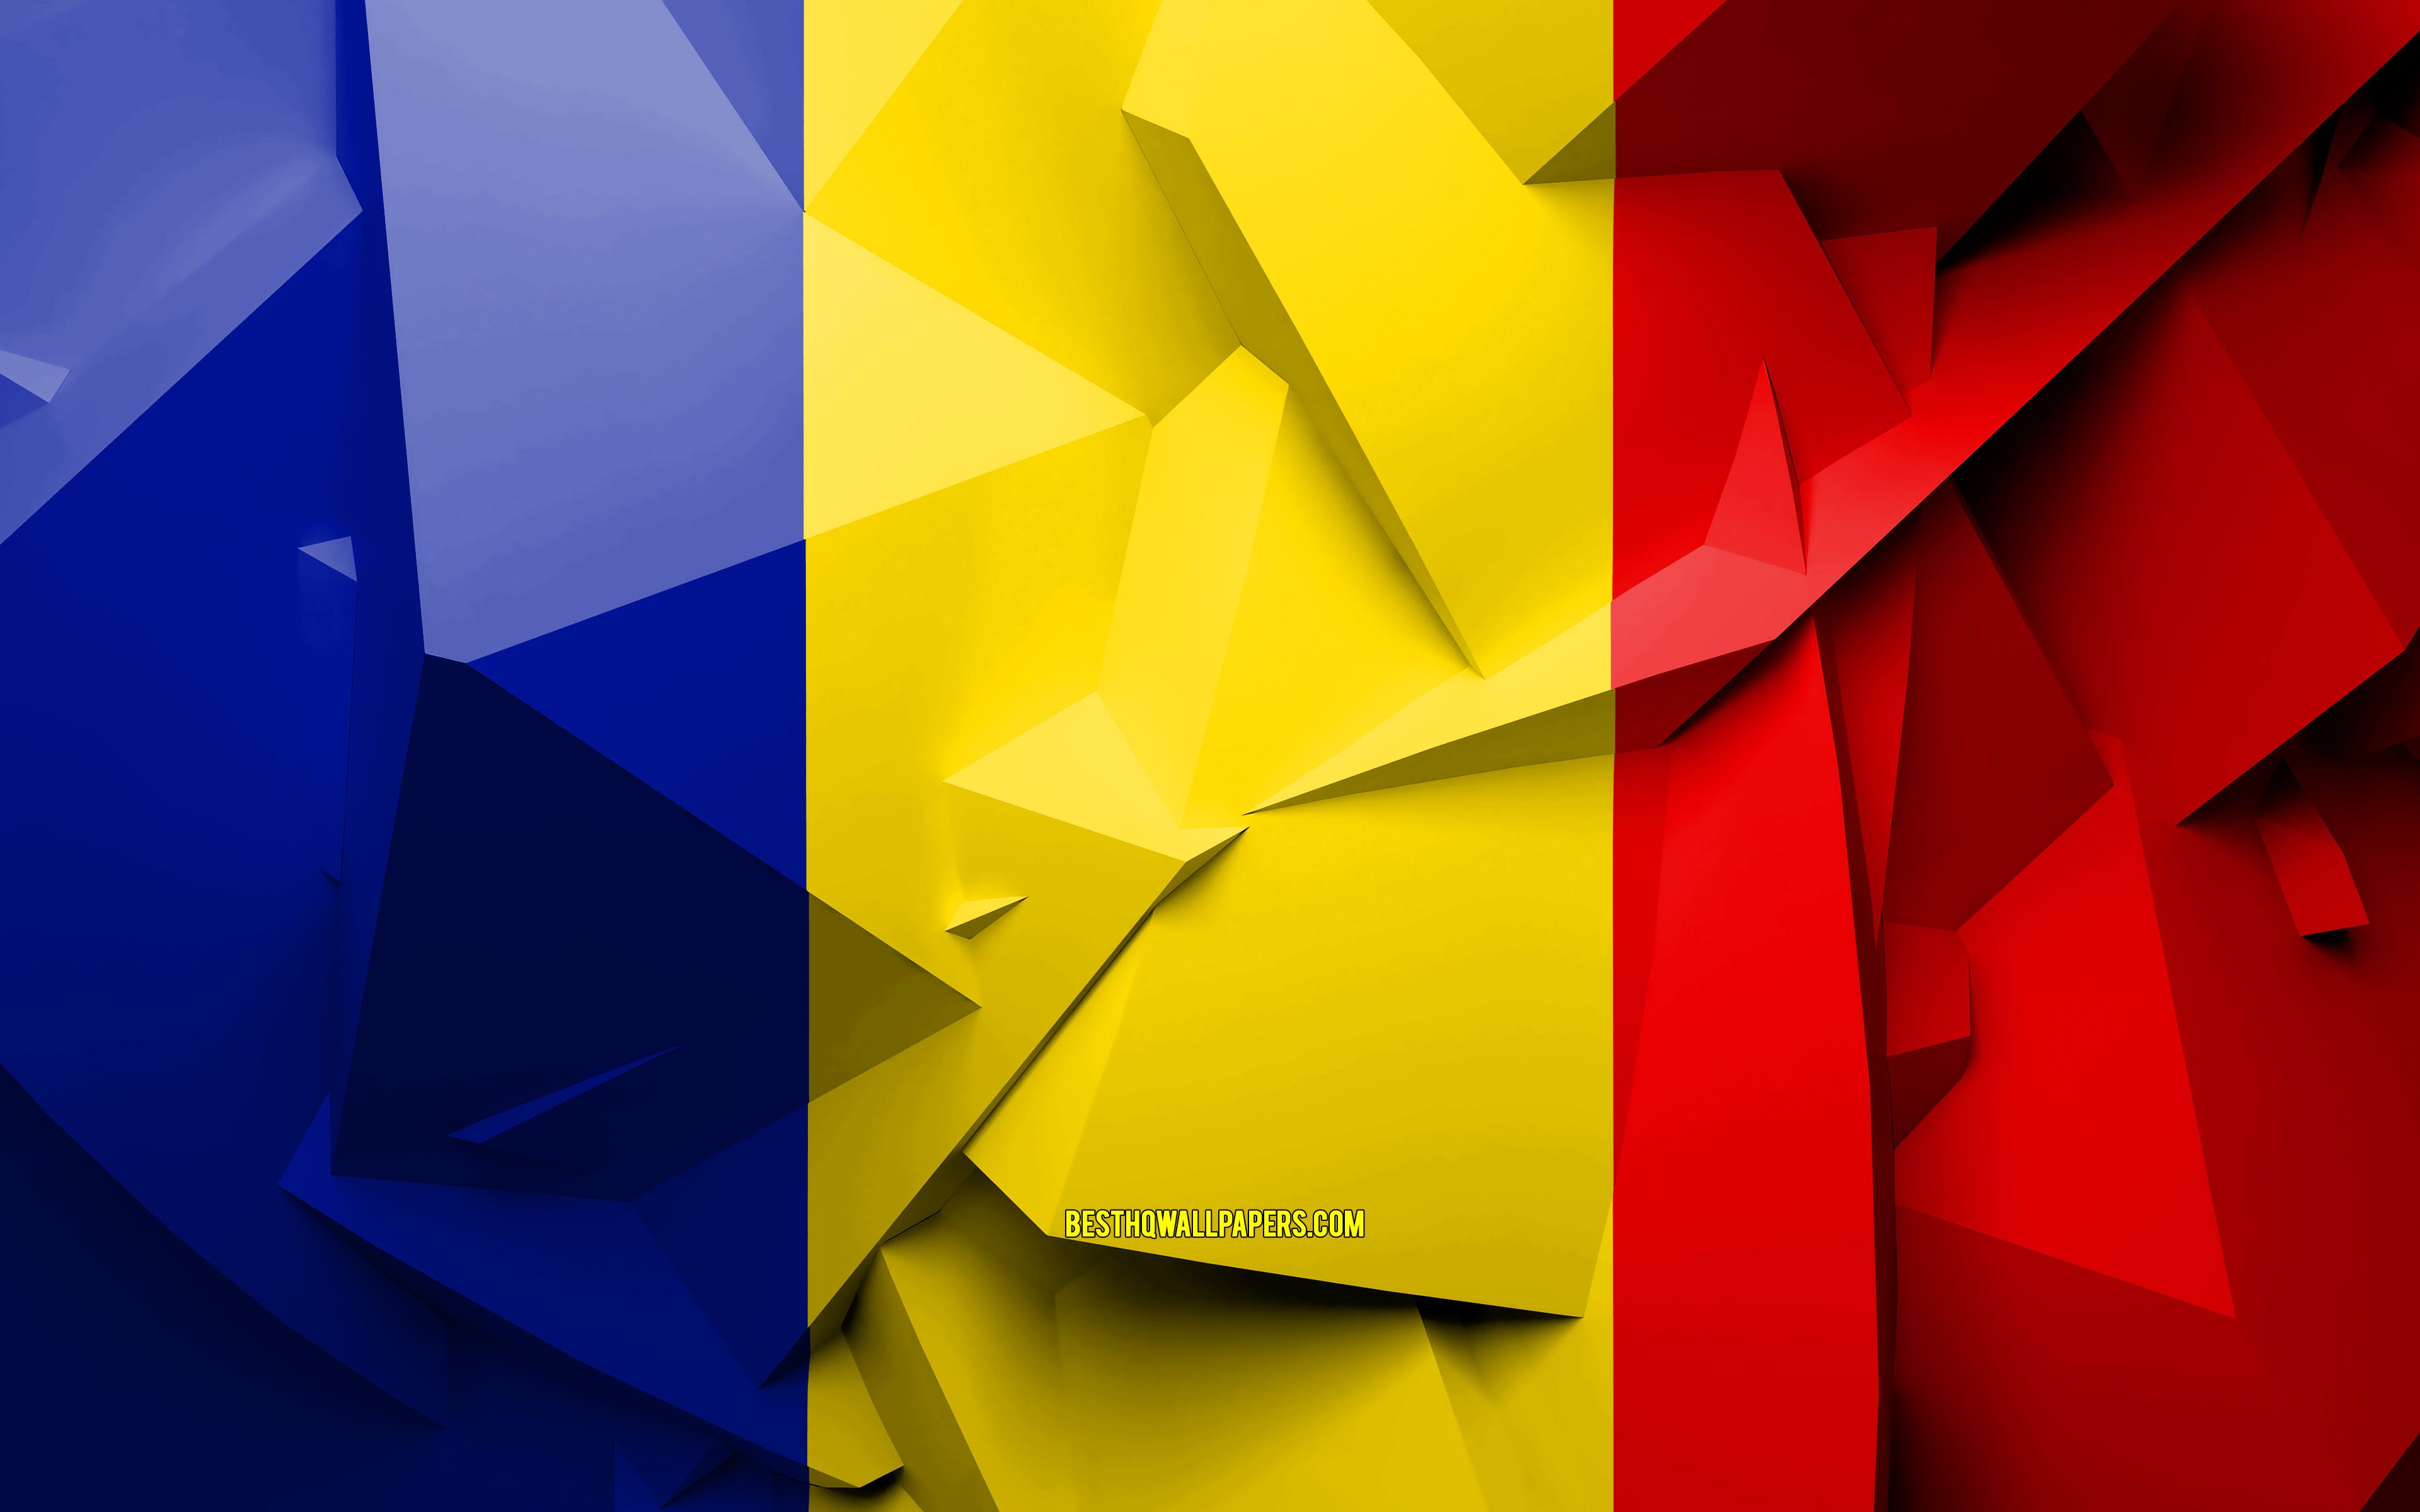 Download wallpaper 4k, Flag of Romania, geometric art, European countries, Romanian flag, creative, Romania, Europe, Romania 3D flag, national symbols for desktop with resolution 3840x2400. High Quality HD picture wallpaper